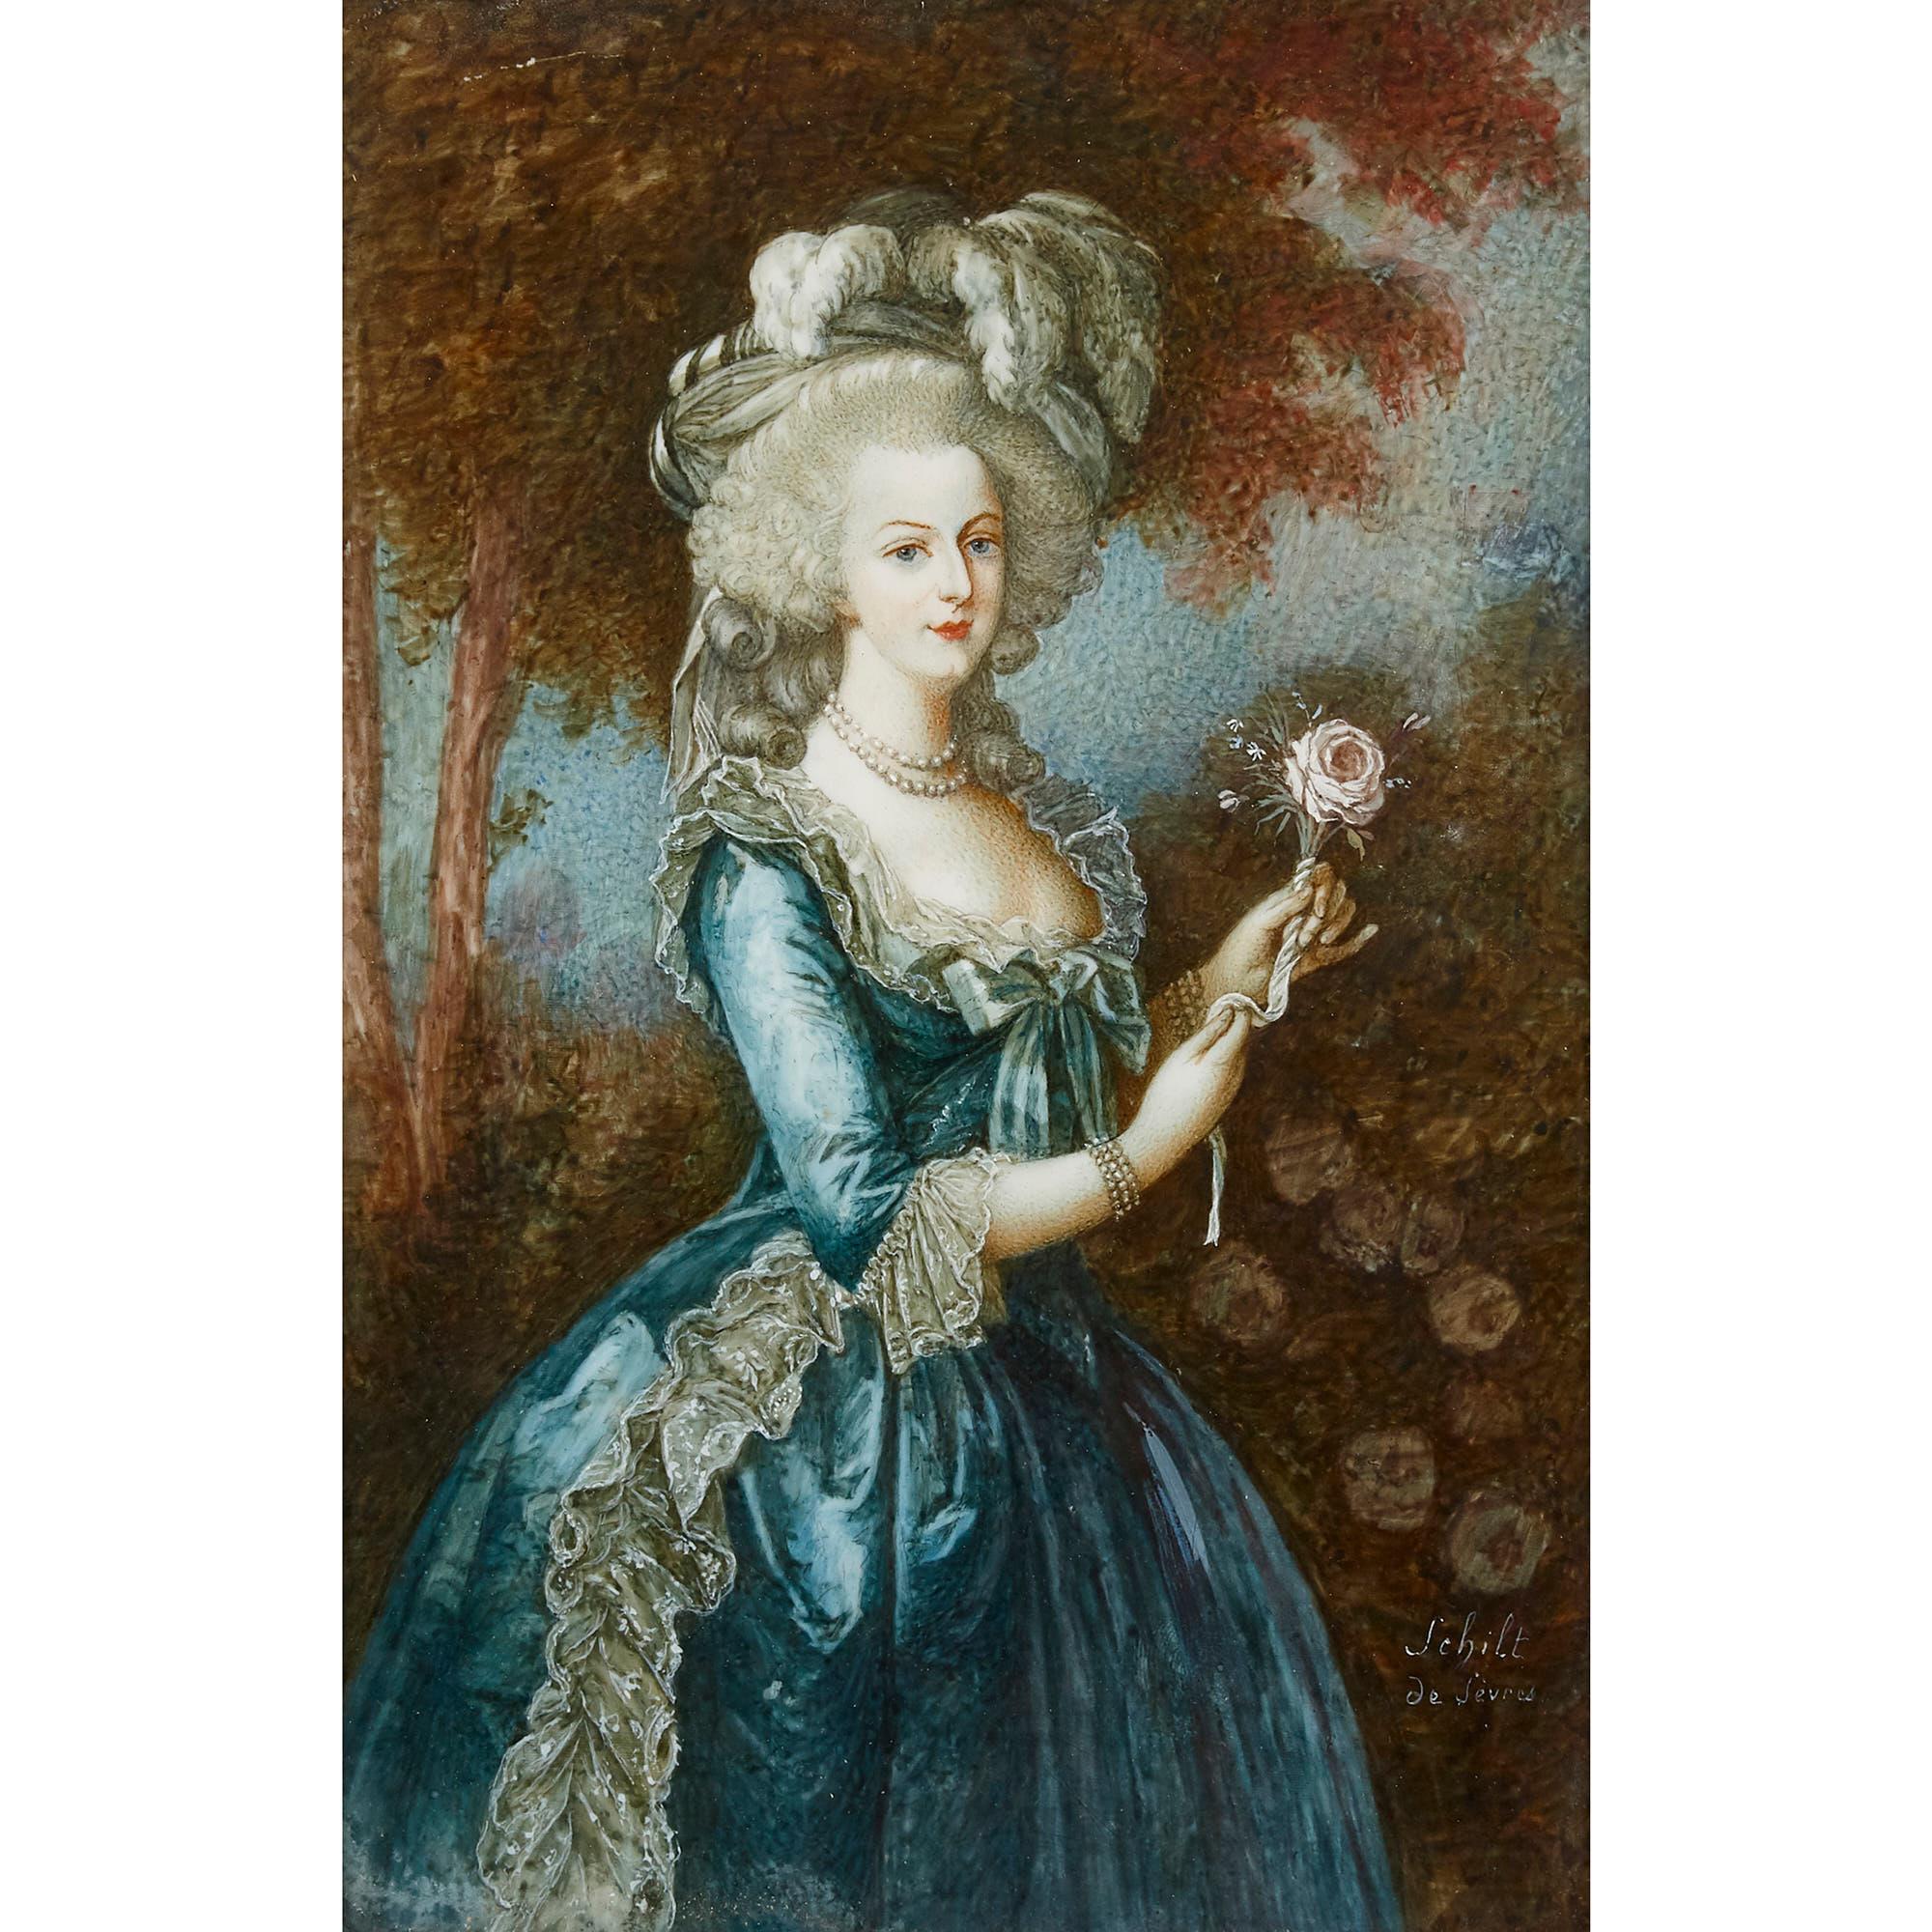 This portrait miniature, which depicts Marie Antoinette, is after a famous original by Le Brun. The current miniature is finely and skillfully painted, rendering an accurate representation of the former French Queen in beautiful and delicate tones.